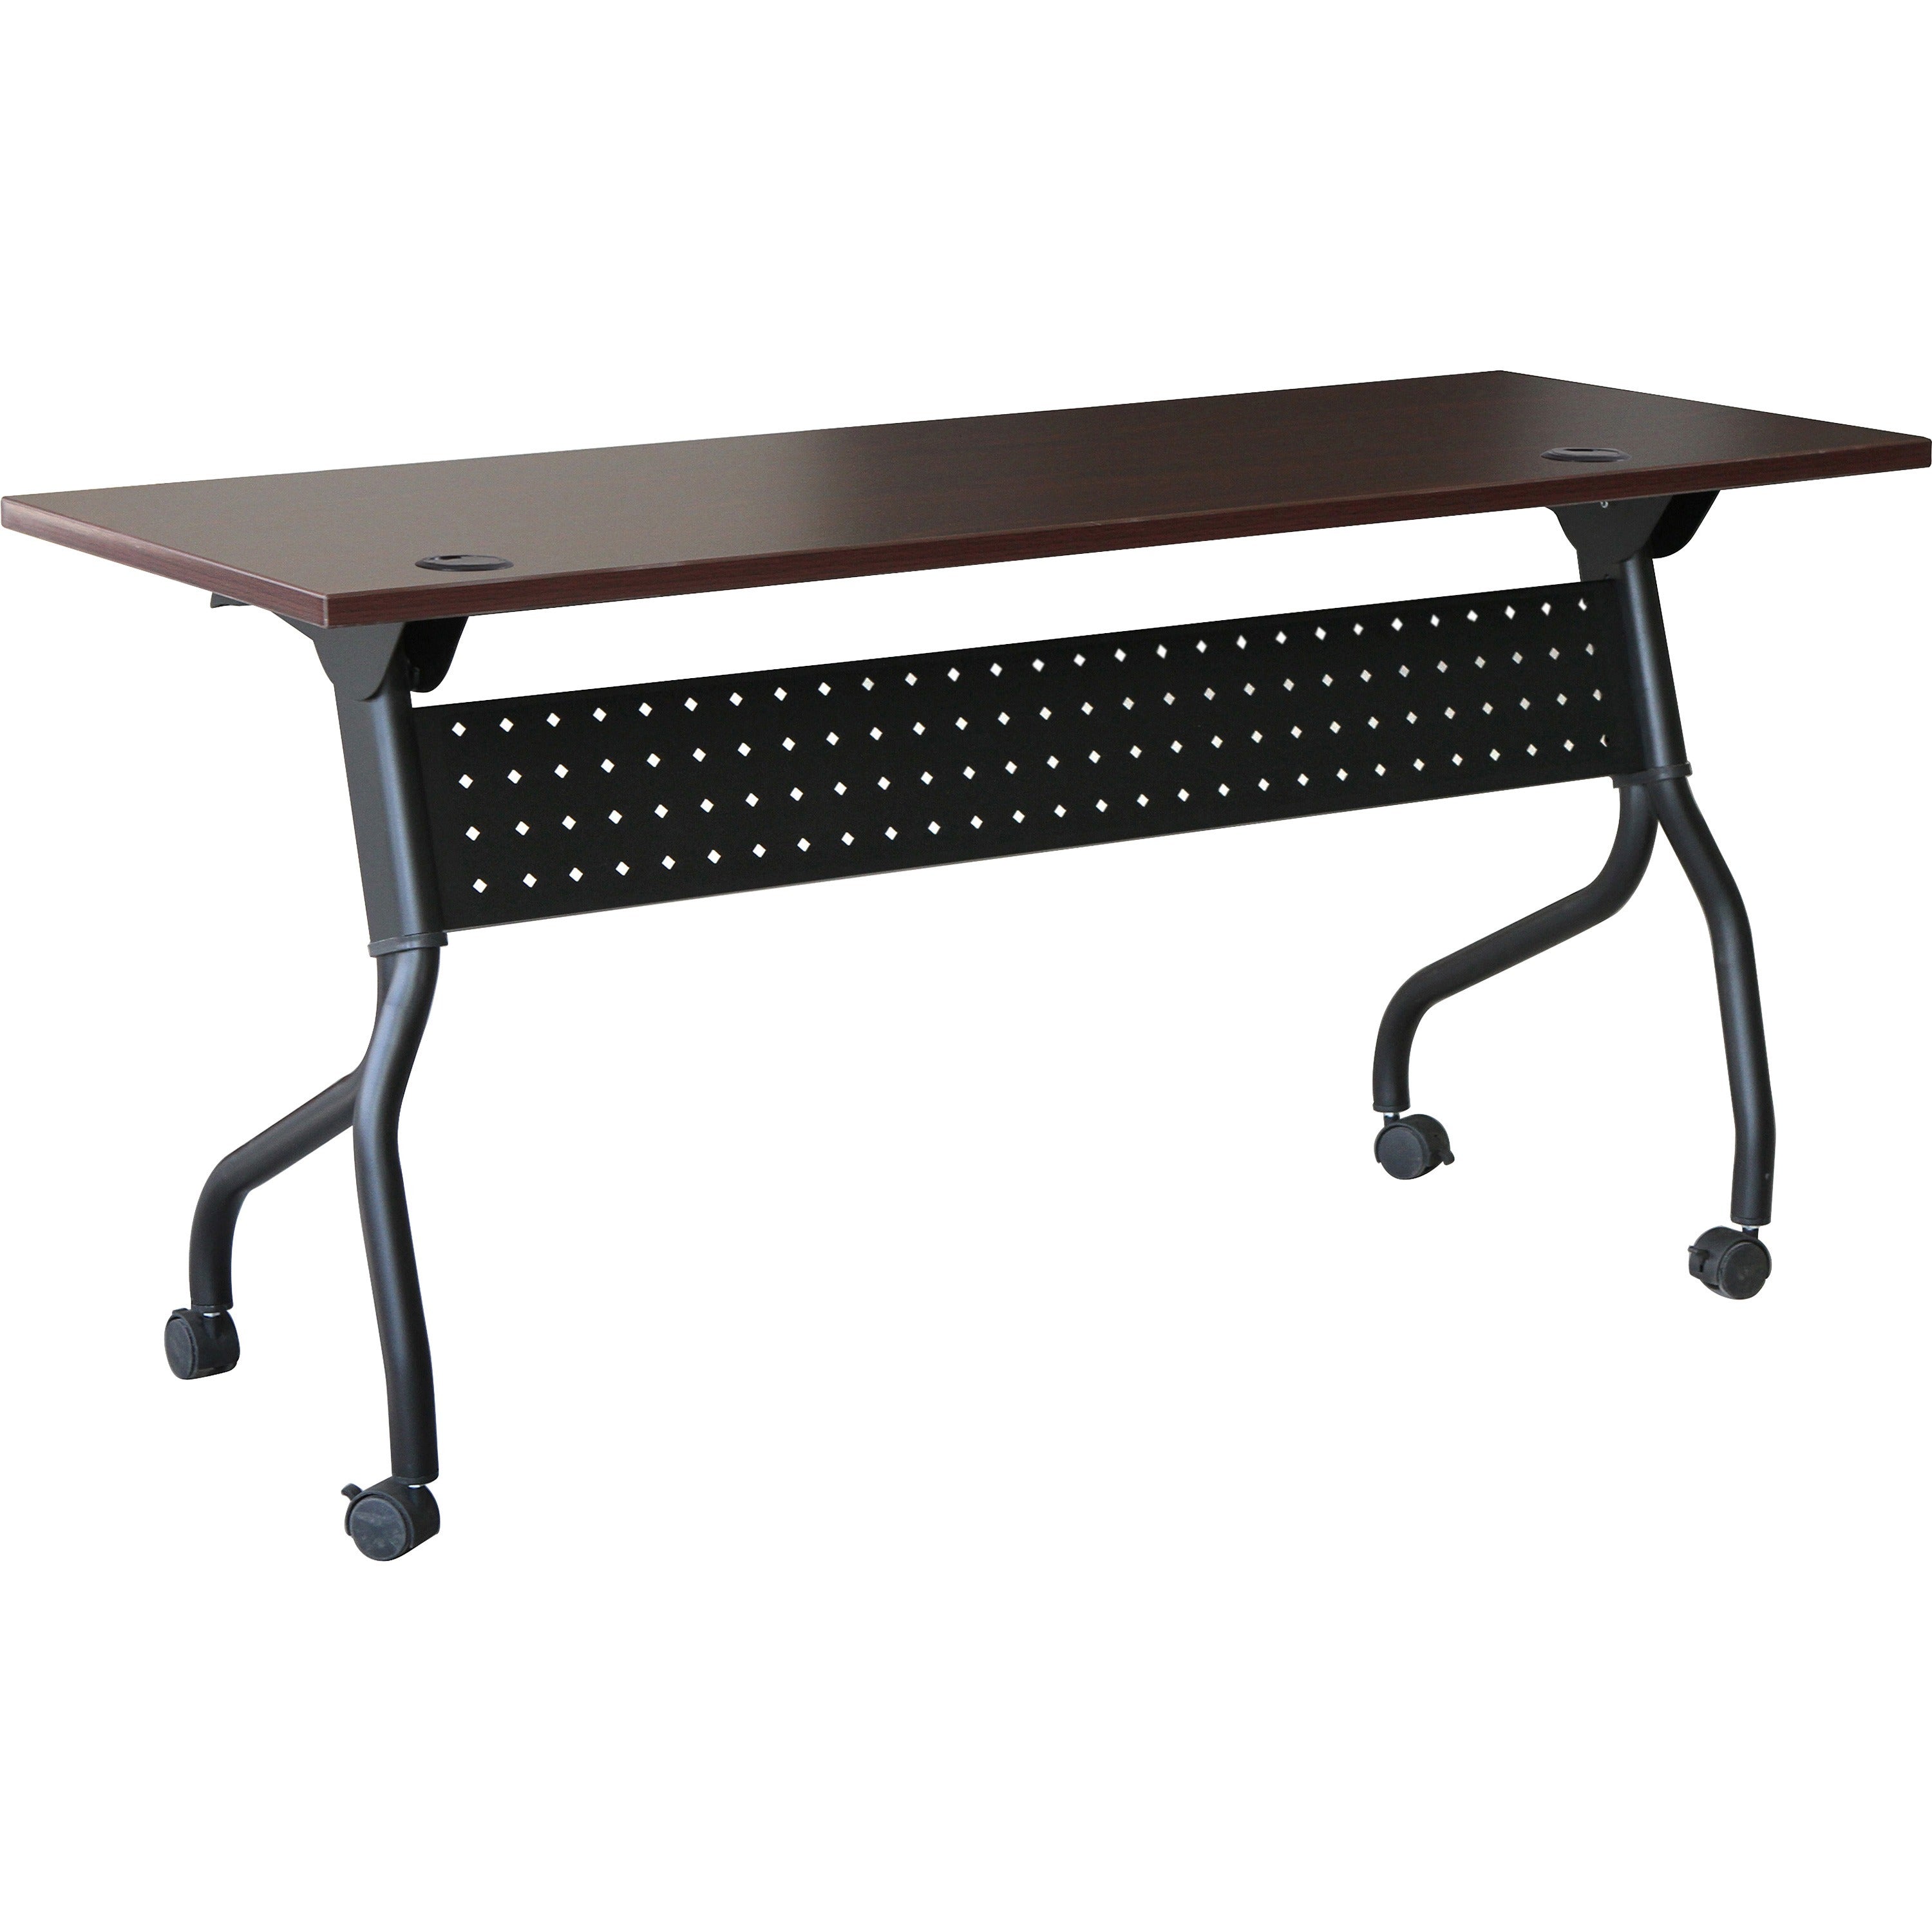 Lorell Flip Top Training Table - For - Table TopRectangle Top - Four Leg Base - 4 Legs x 60" Table Top Width x 23.60" Table Top Depth - 29.50" Height x 59" Width x 23.63" Depth - Assembly Required - Black, Mahogany - Melamine, Nylon - 1 Each - 